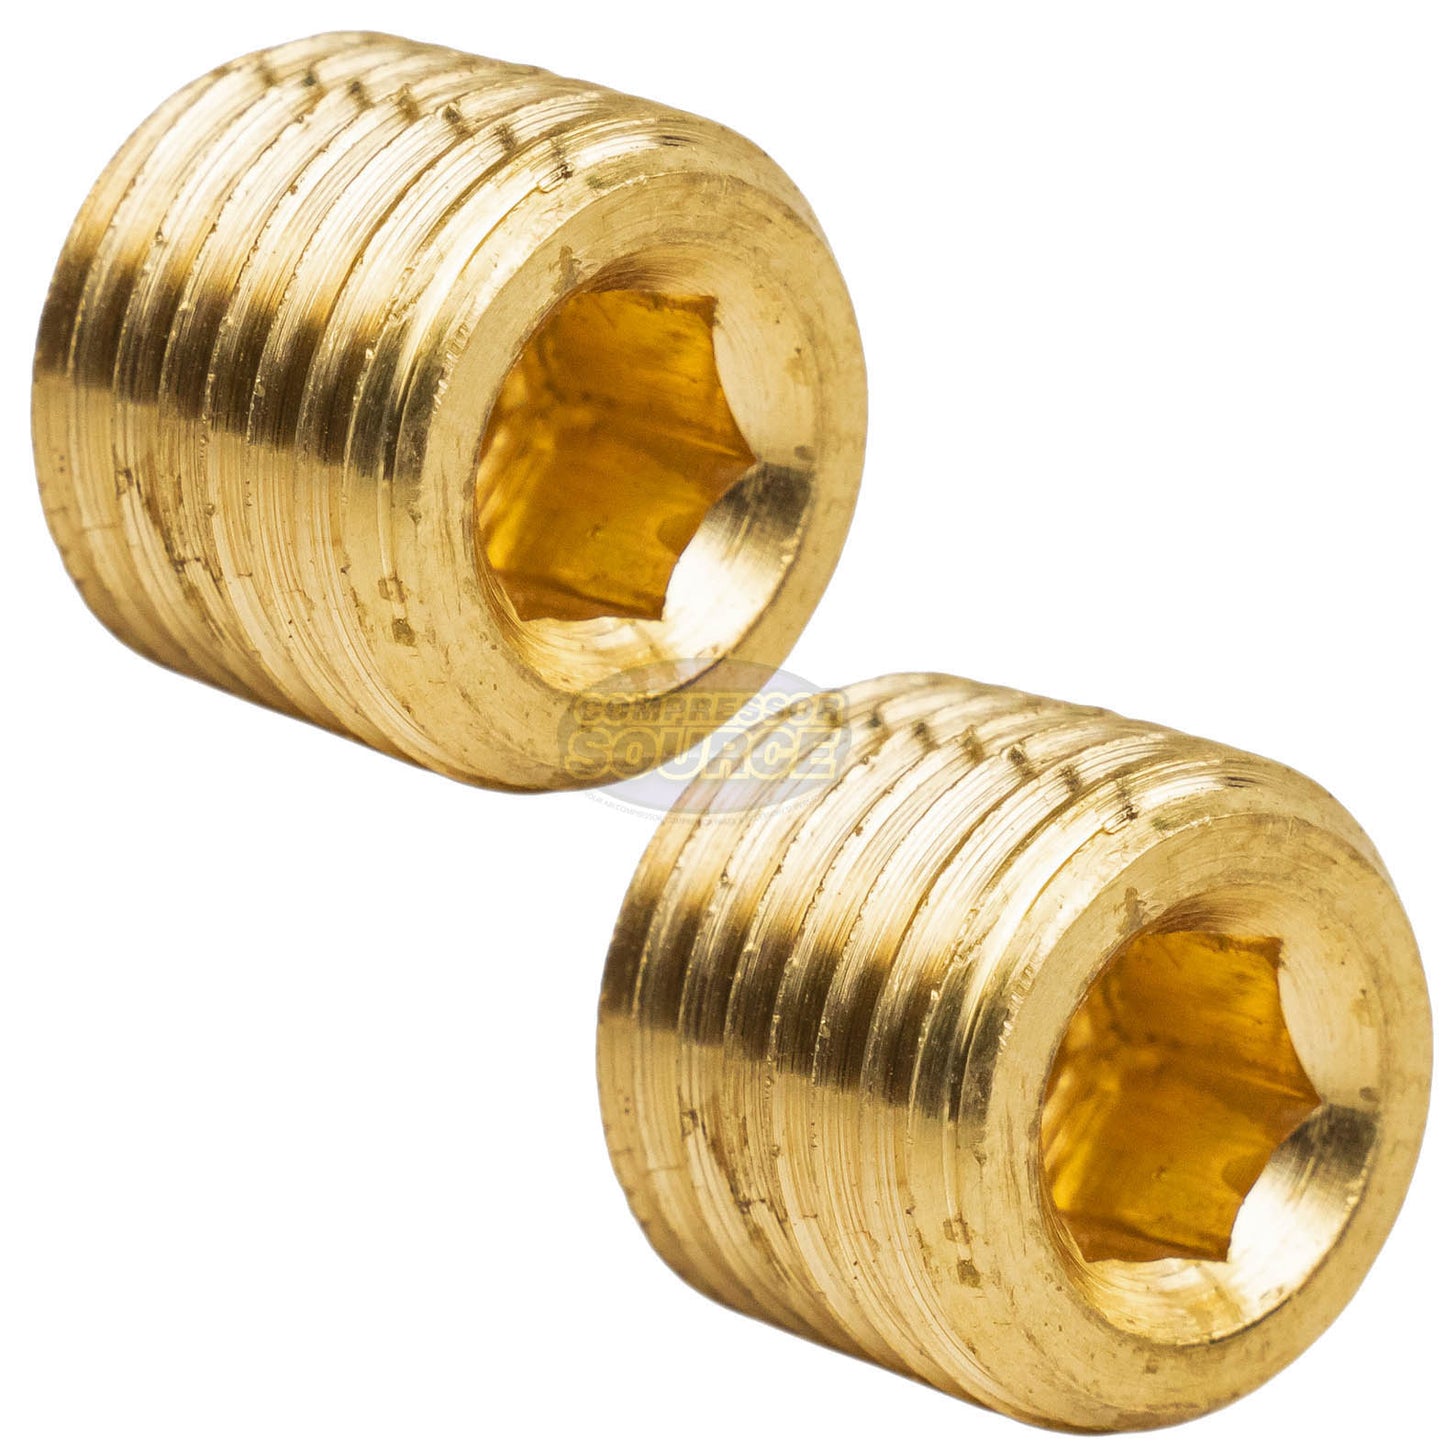 2 Brass 1/4" Pipe Plugs Countersunk Hex Head Style Male NPT Pipe End Fitting Cap